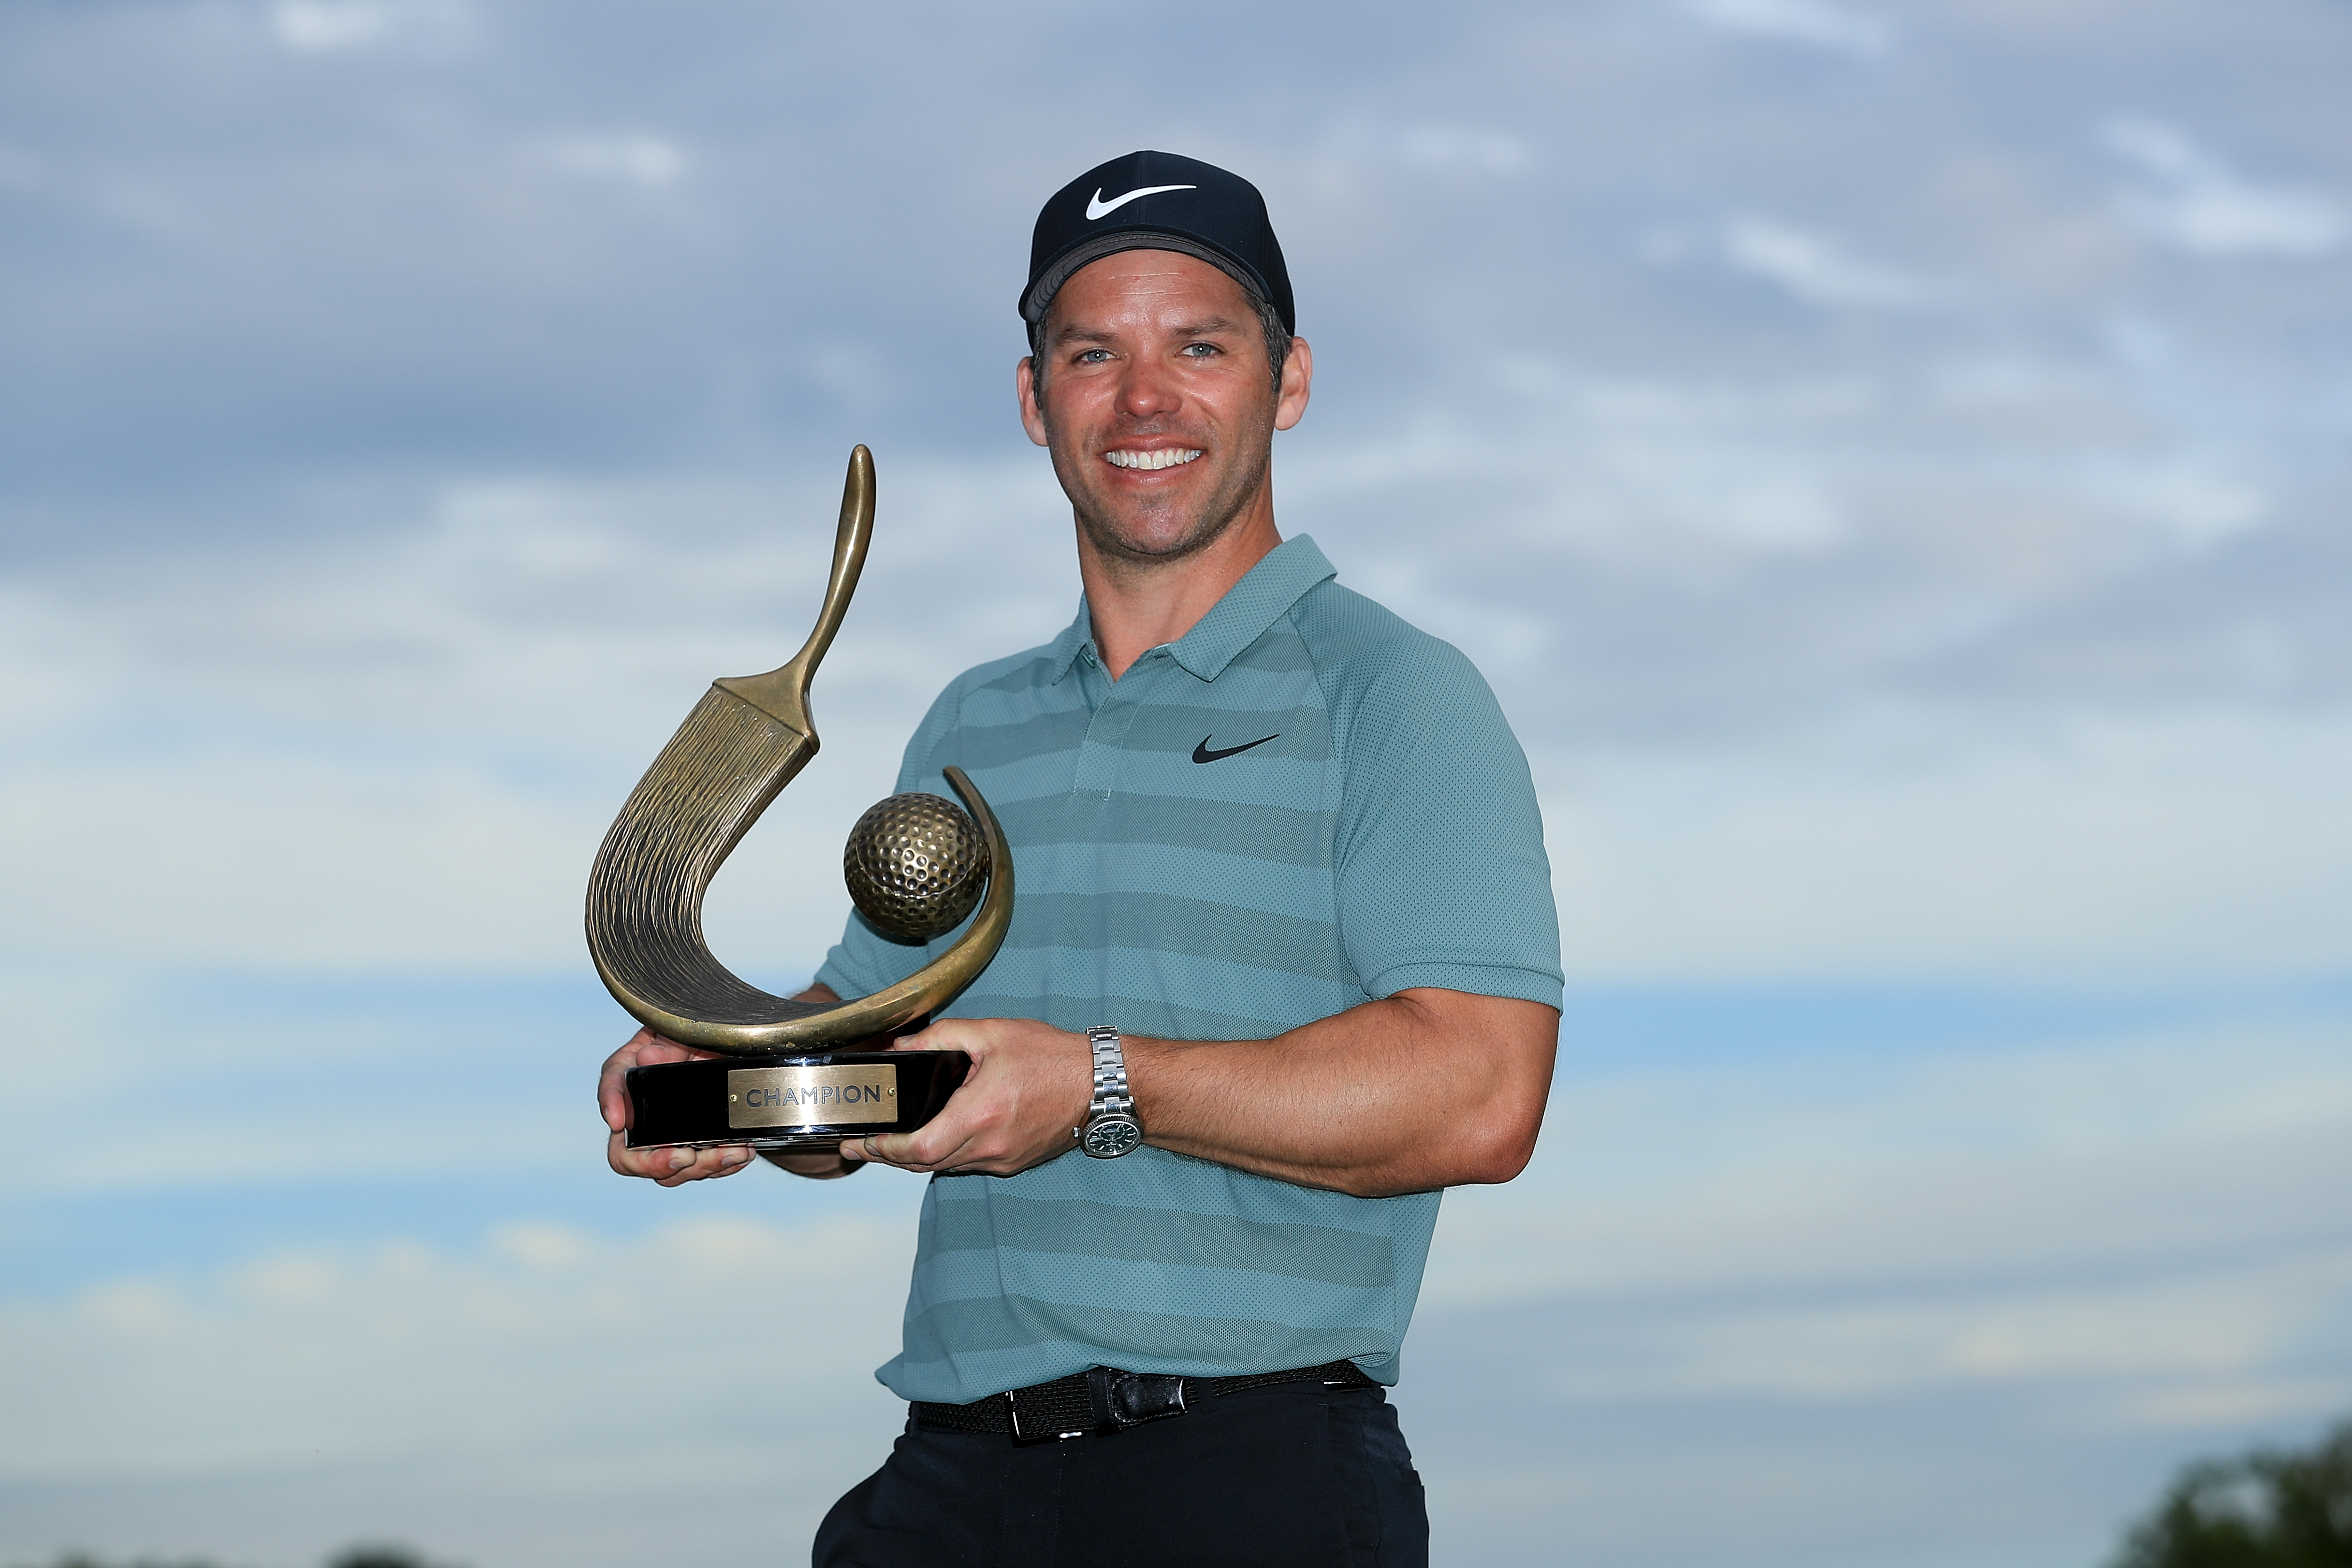 Casey pips Woods to win Valspar Championship